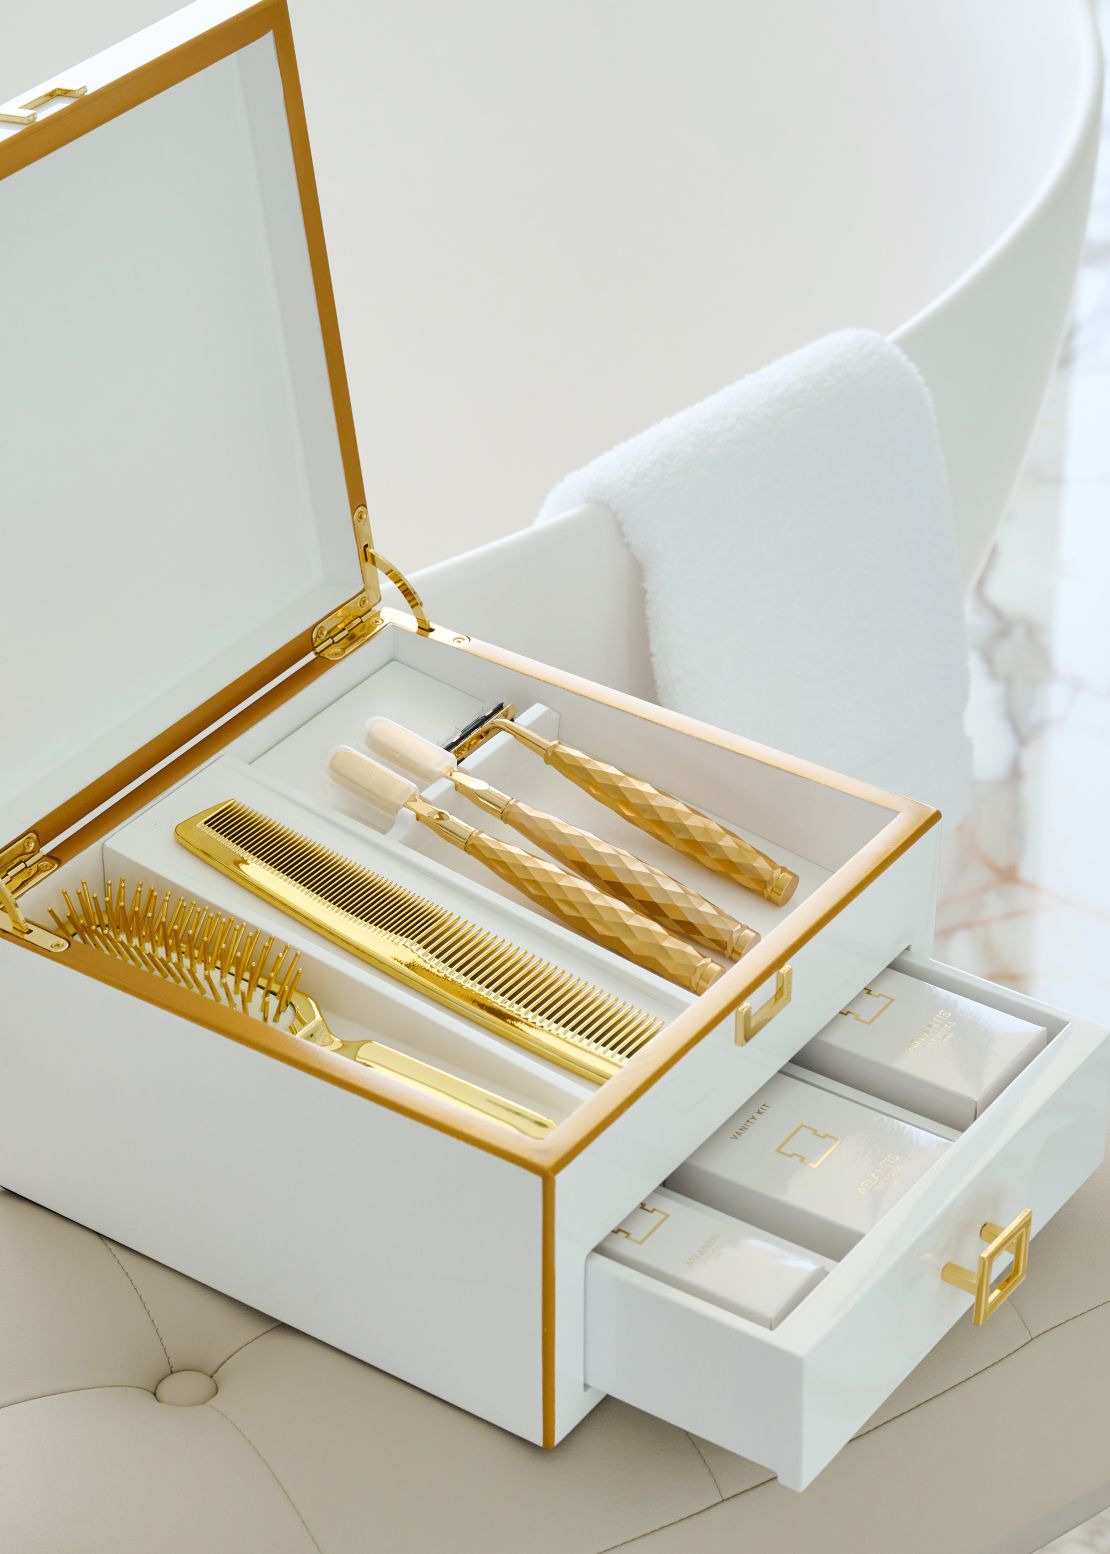 Atlantis, The Royal: The Royal Mansion penthouse suite has designer amenities made by French fashion house Hermès, as well as bespoke gold toothbrushes, combs and brushes.